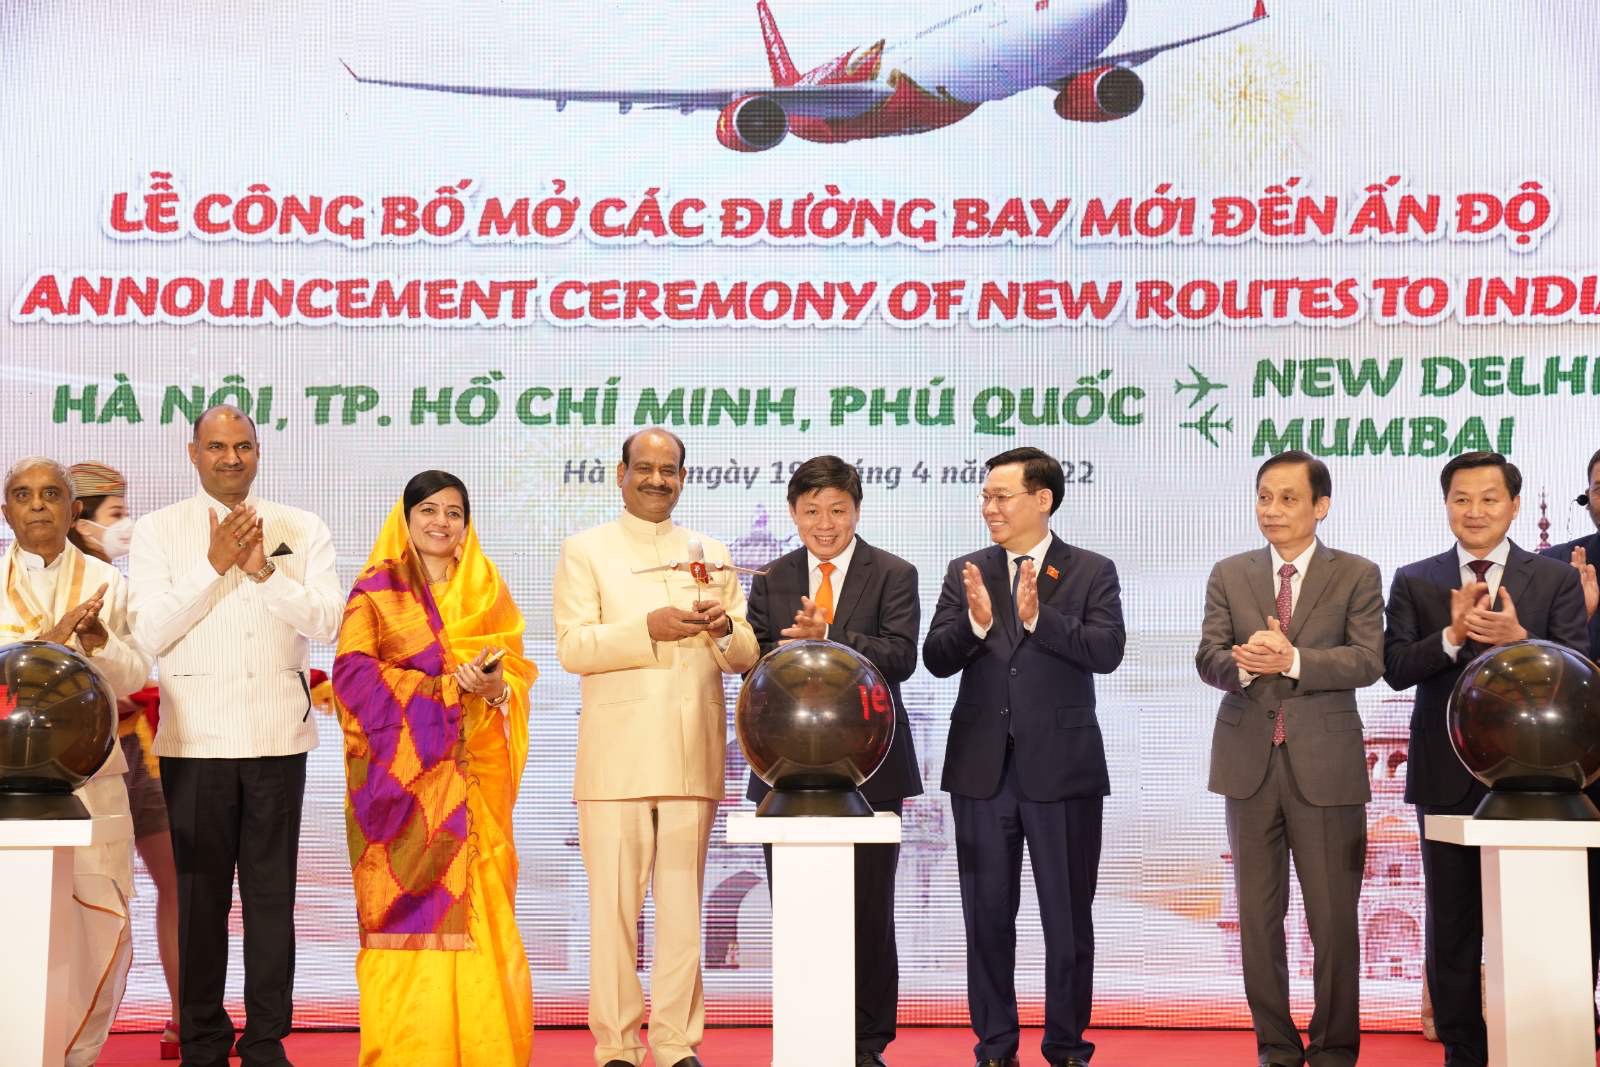 Vietnamese National Assembly Chairman Vuong Dinh Hue and Speaker of the Indian Lok Sabha Om Birla attend a ceremony for Vietjet’s new direct routes to India in Hanoi, April 19, 2022. Photo: Vietjet